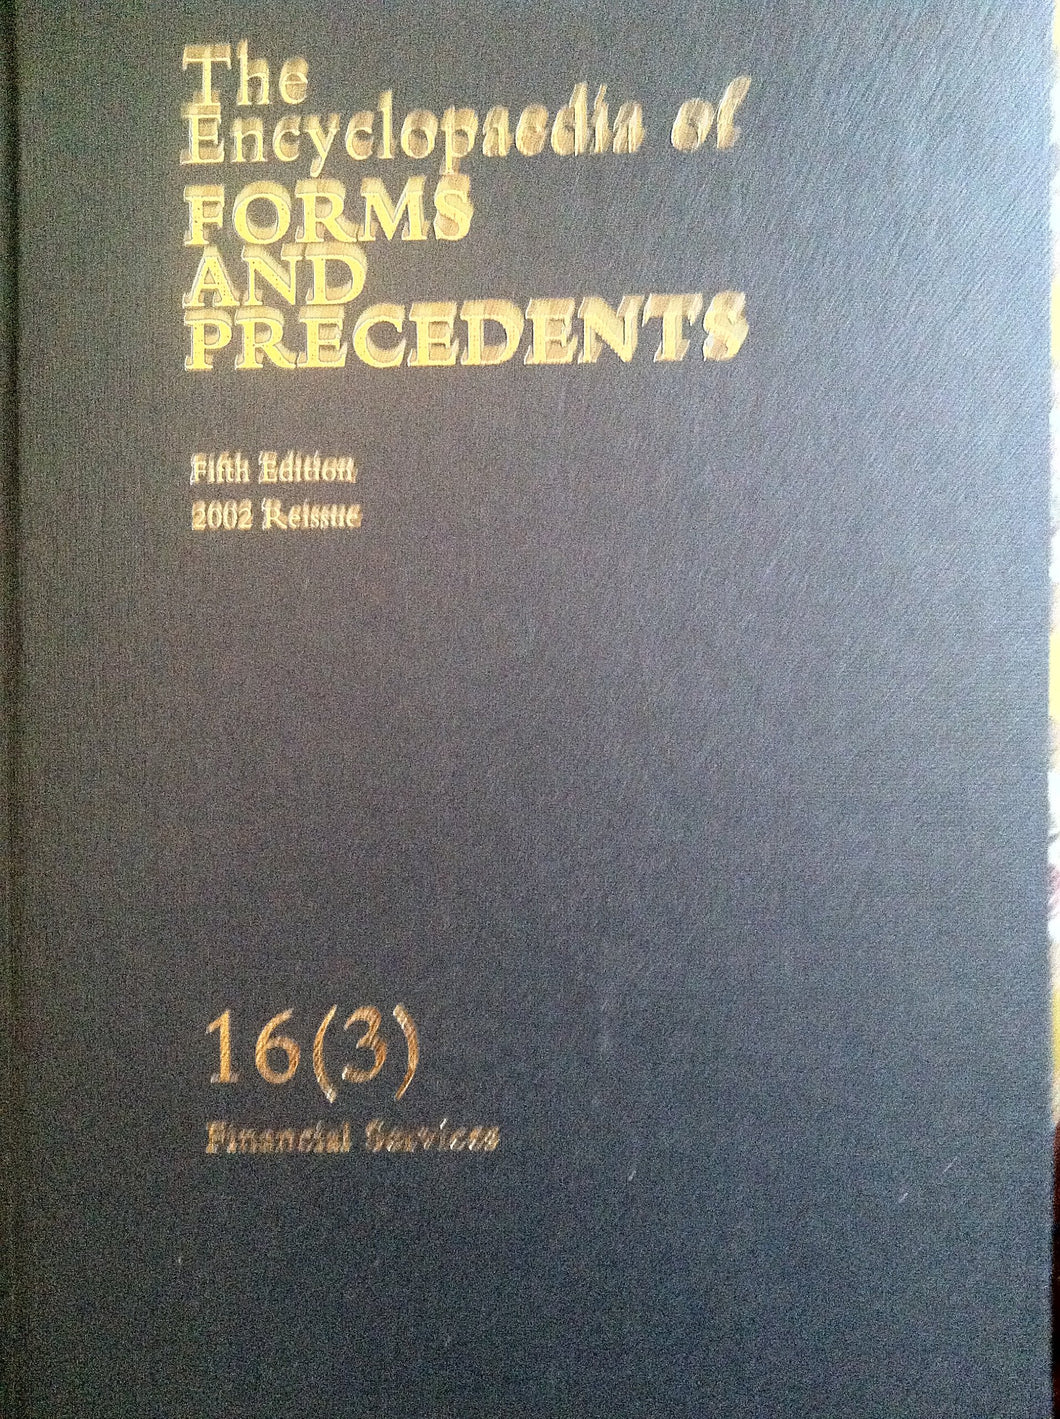 Encyclopedia of Forms and Precedents 16(3)